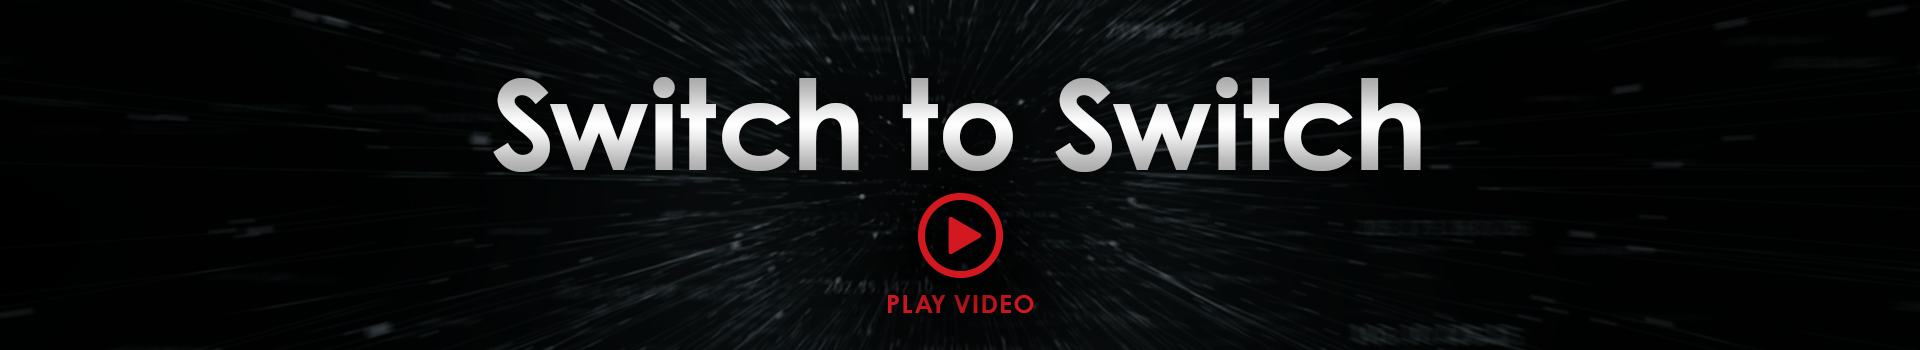 Switch to Switch | Play Video